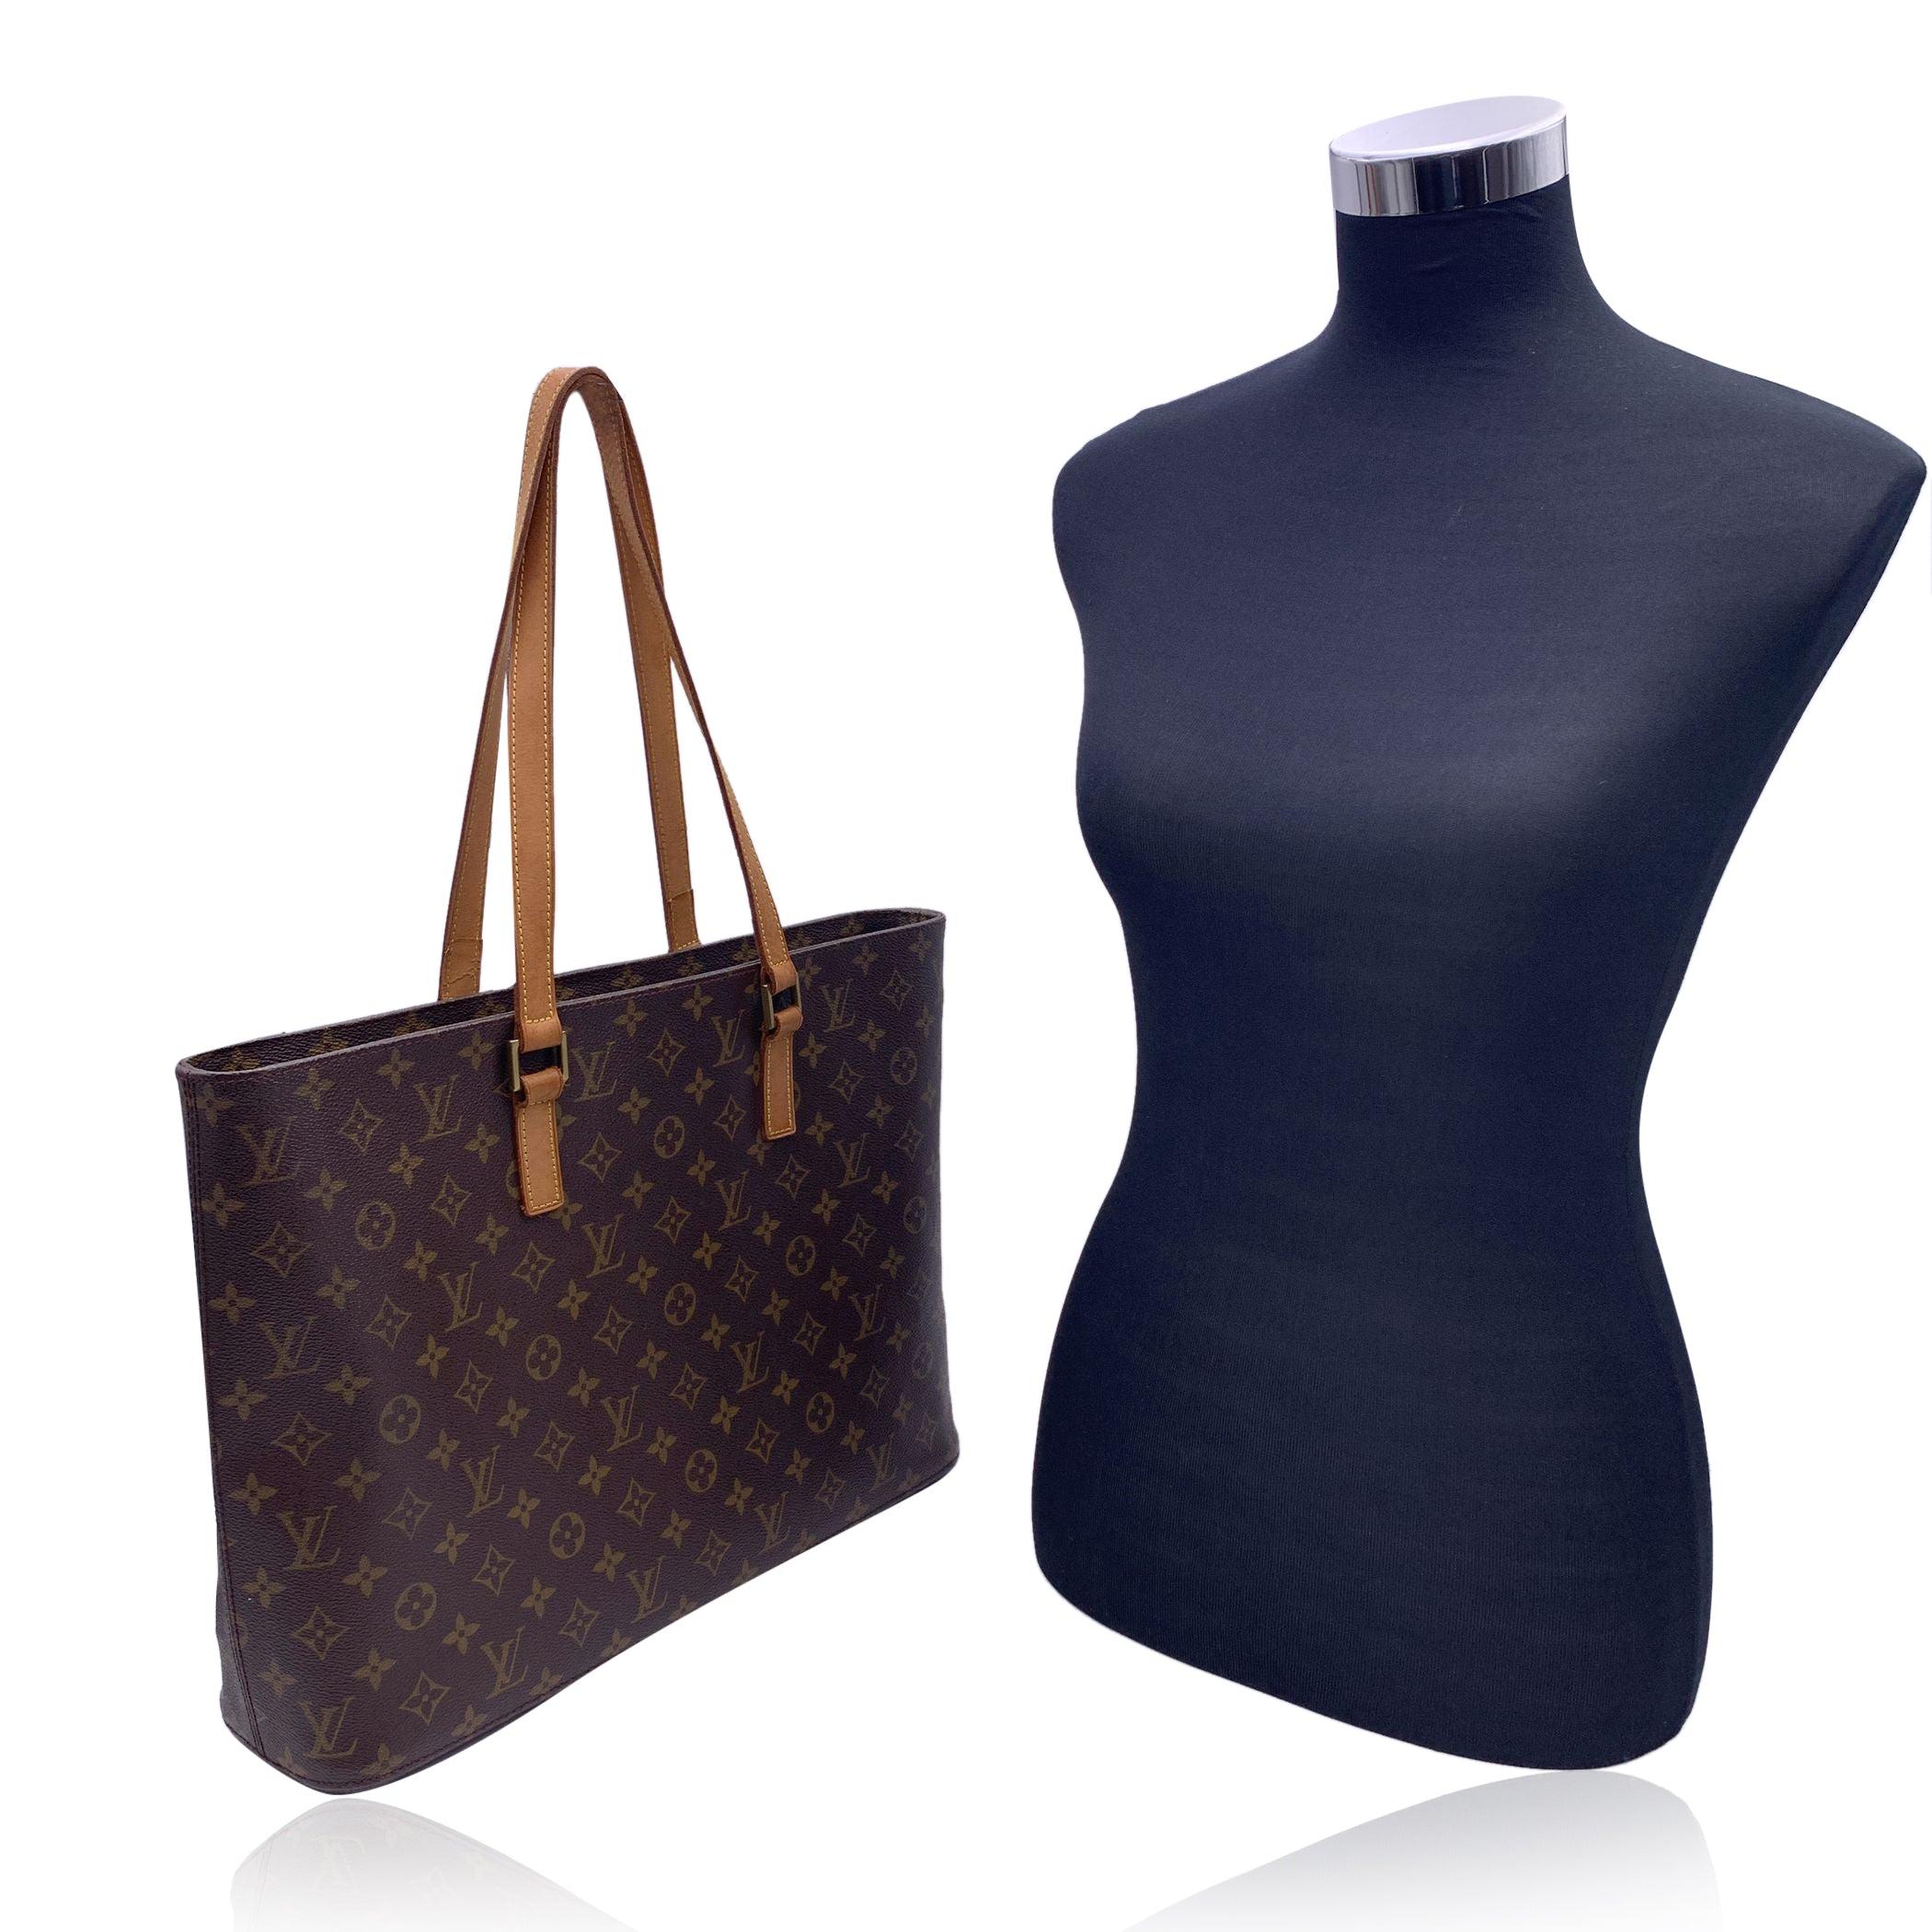 Louis Vuitton Luco Tote Bag in timeless monogram canvas. It features 2 leather shoulder straps. Upper zipper closure. Beige alcantara lining inside with 1 side zipper pocket, 1 side open pocket and 3 smaller open pockets. D-ring inside. 'Louis